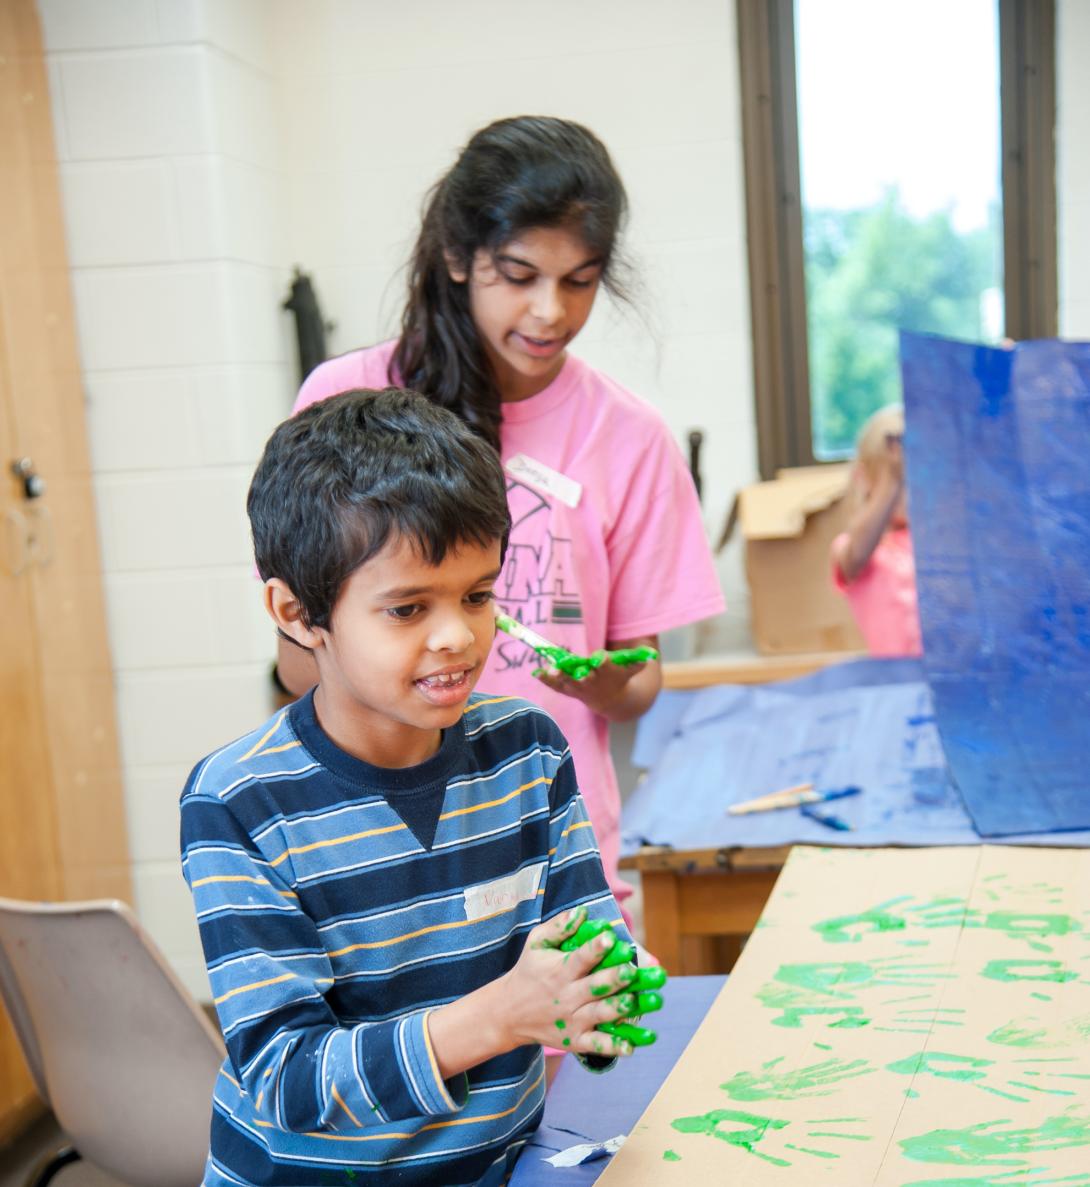 Youth working with clay at art camp